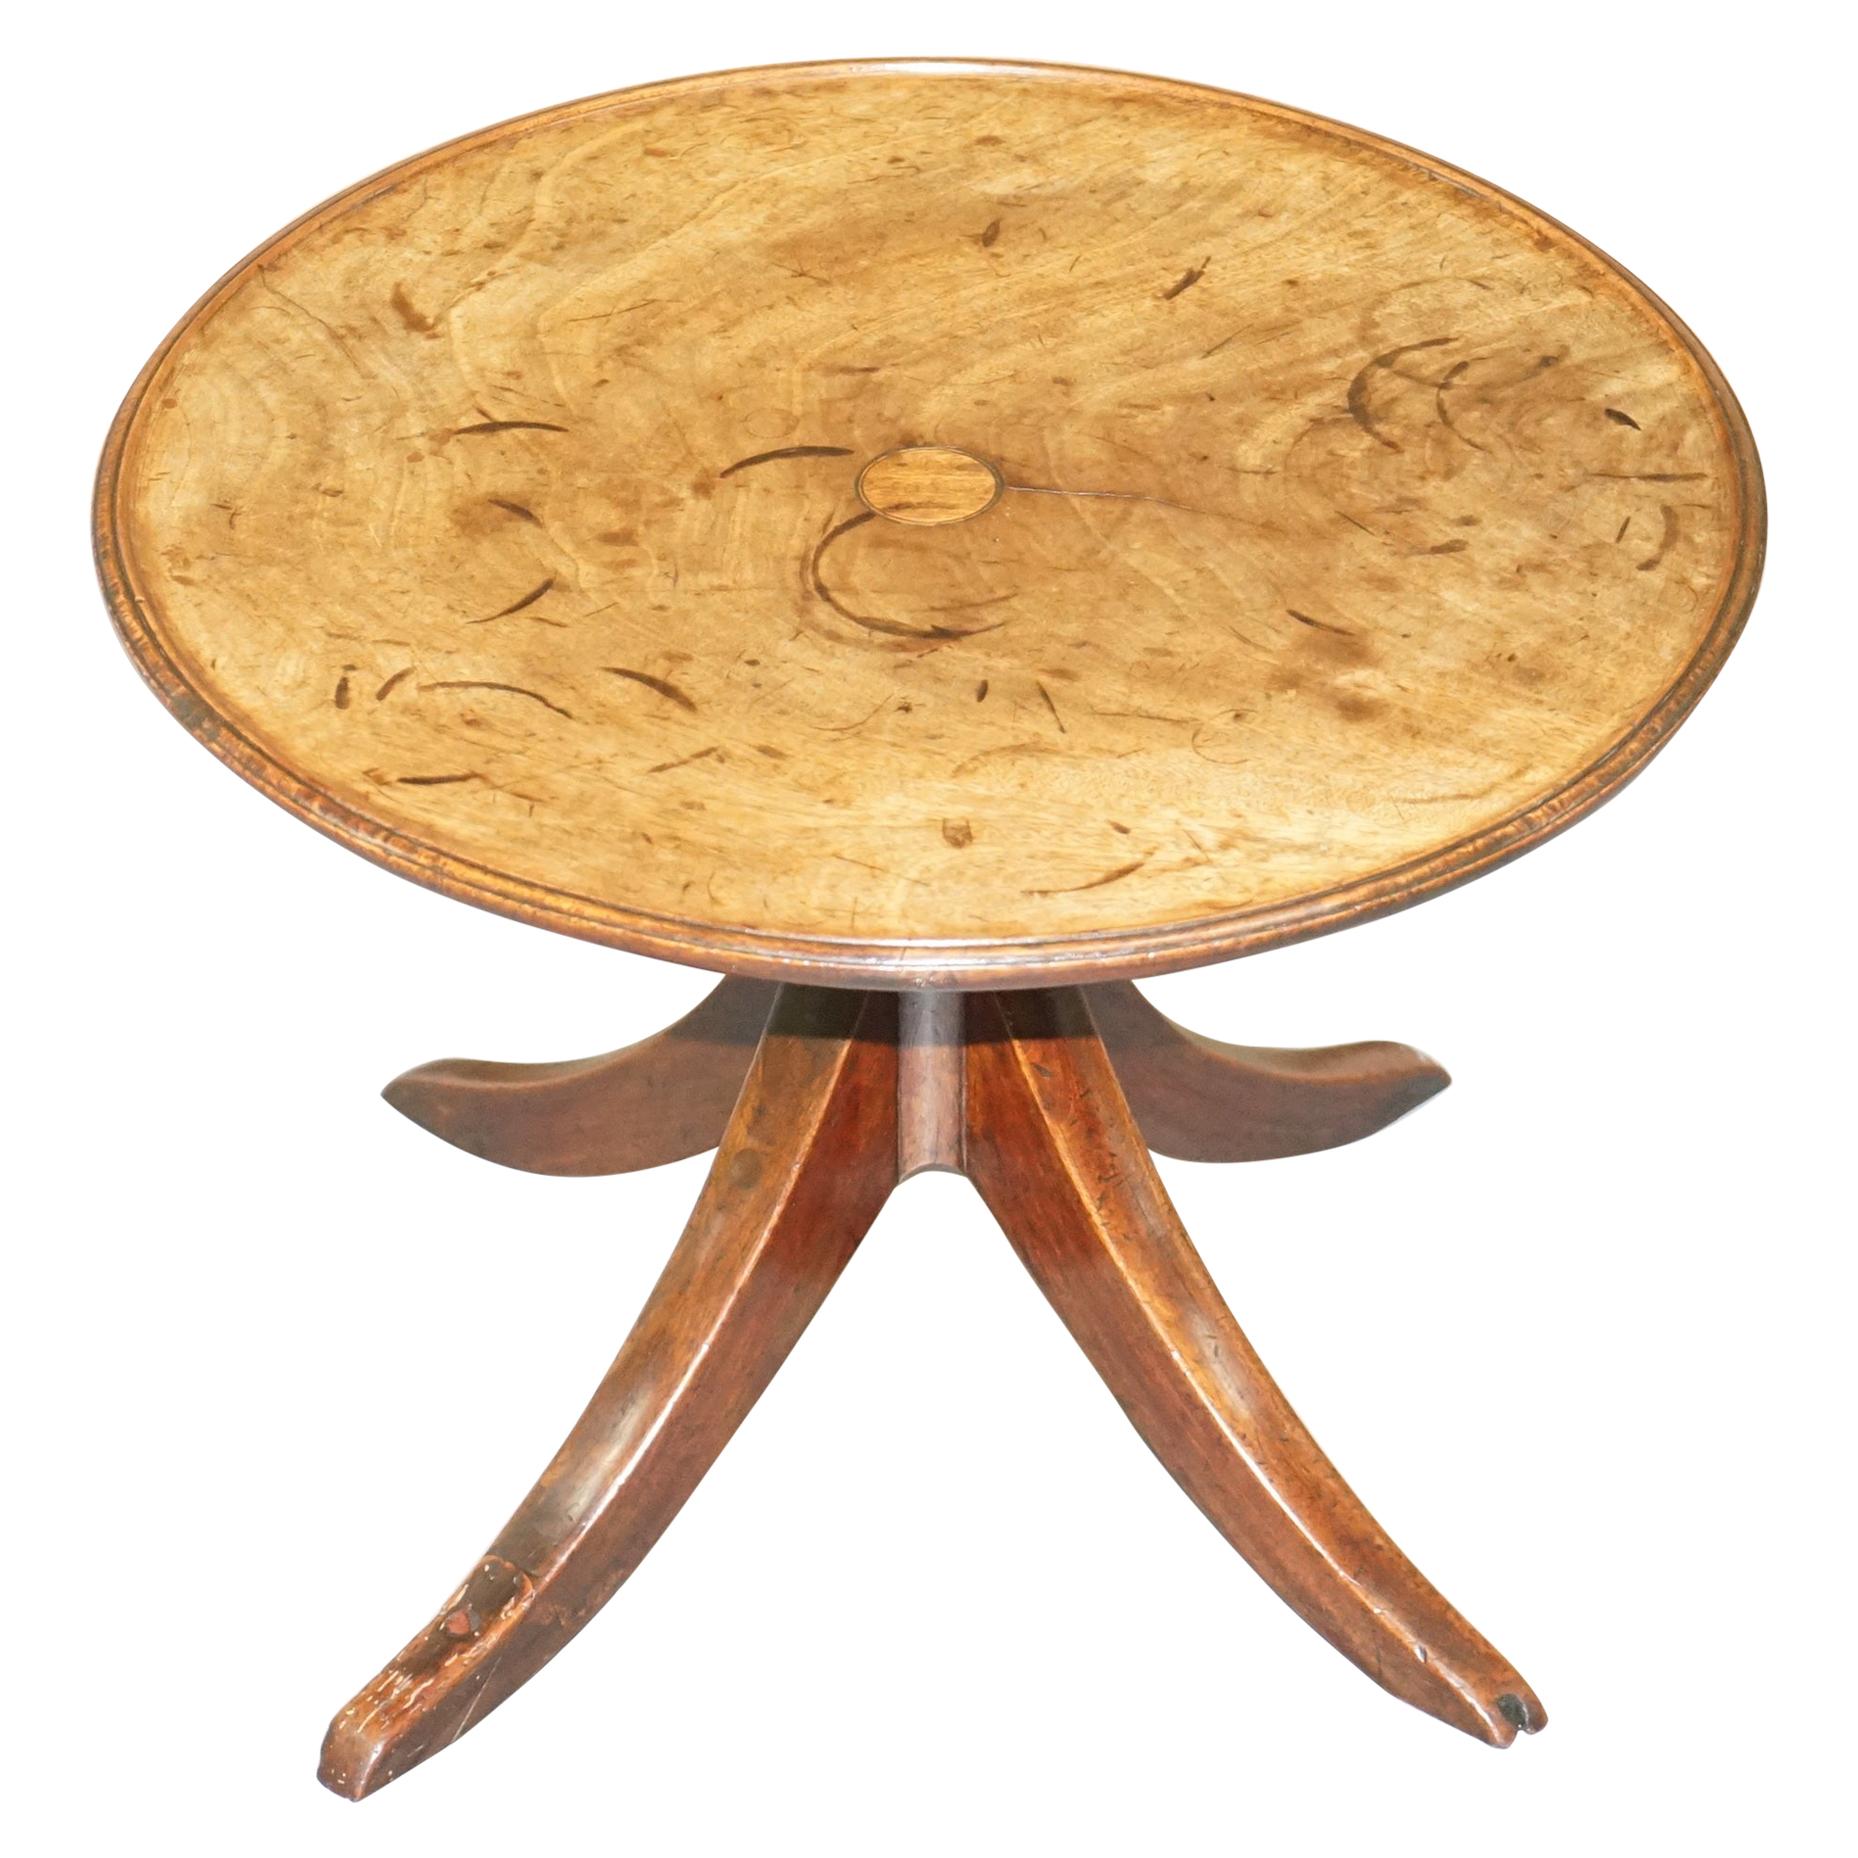 Primitive circa 1840 English Walnut Round Side Table with Lots of Age and Patina For Sale